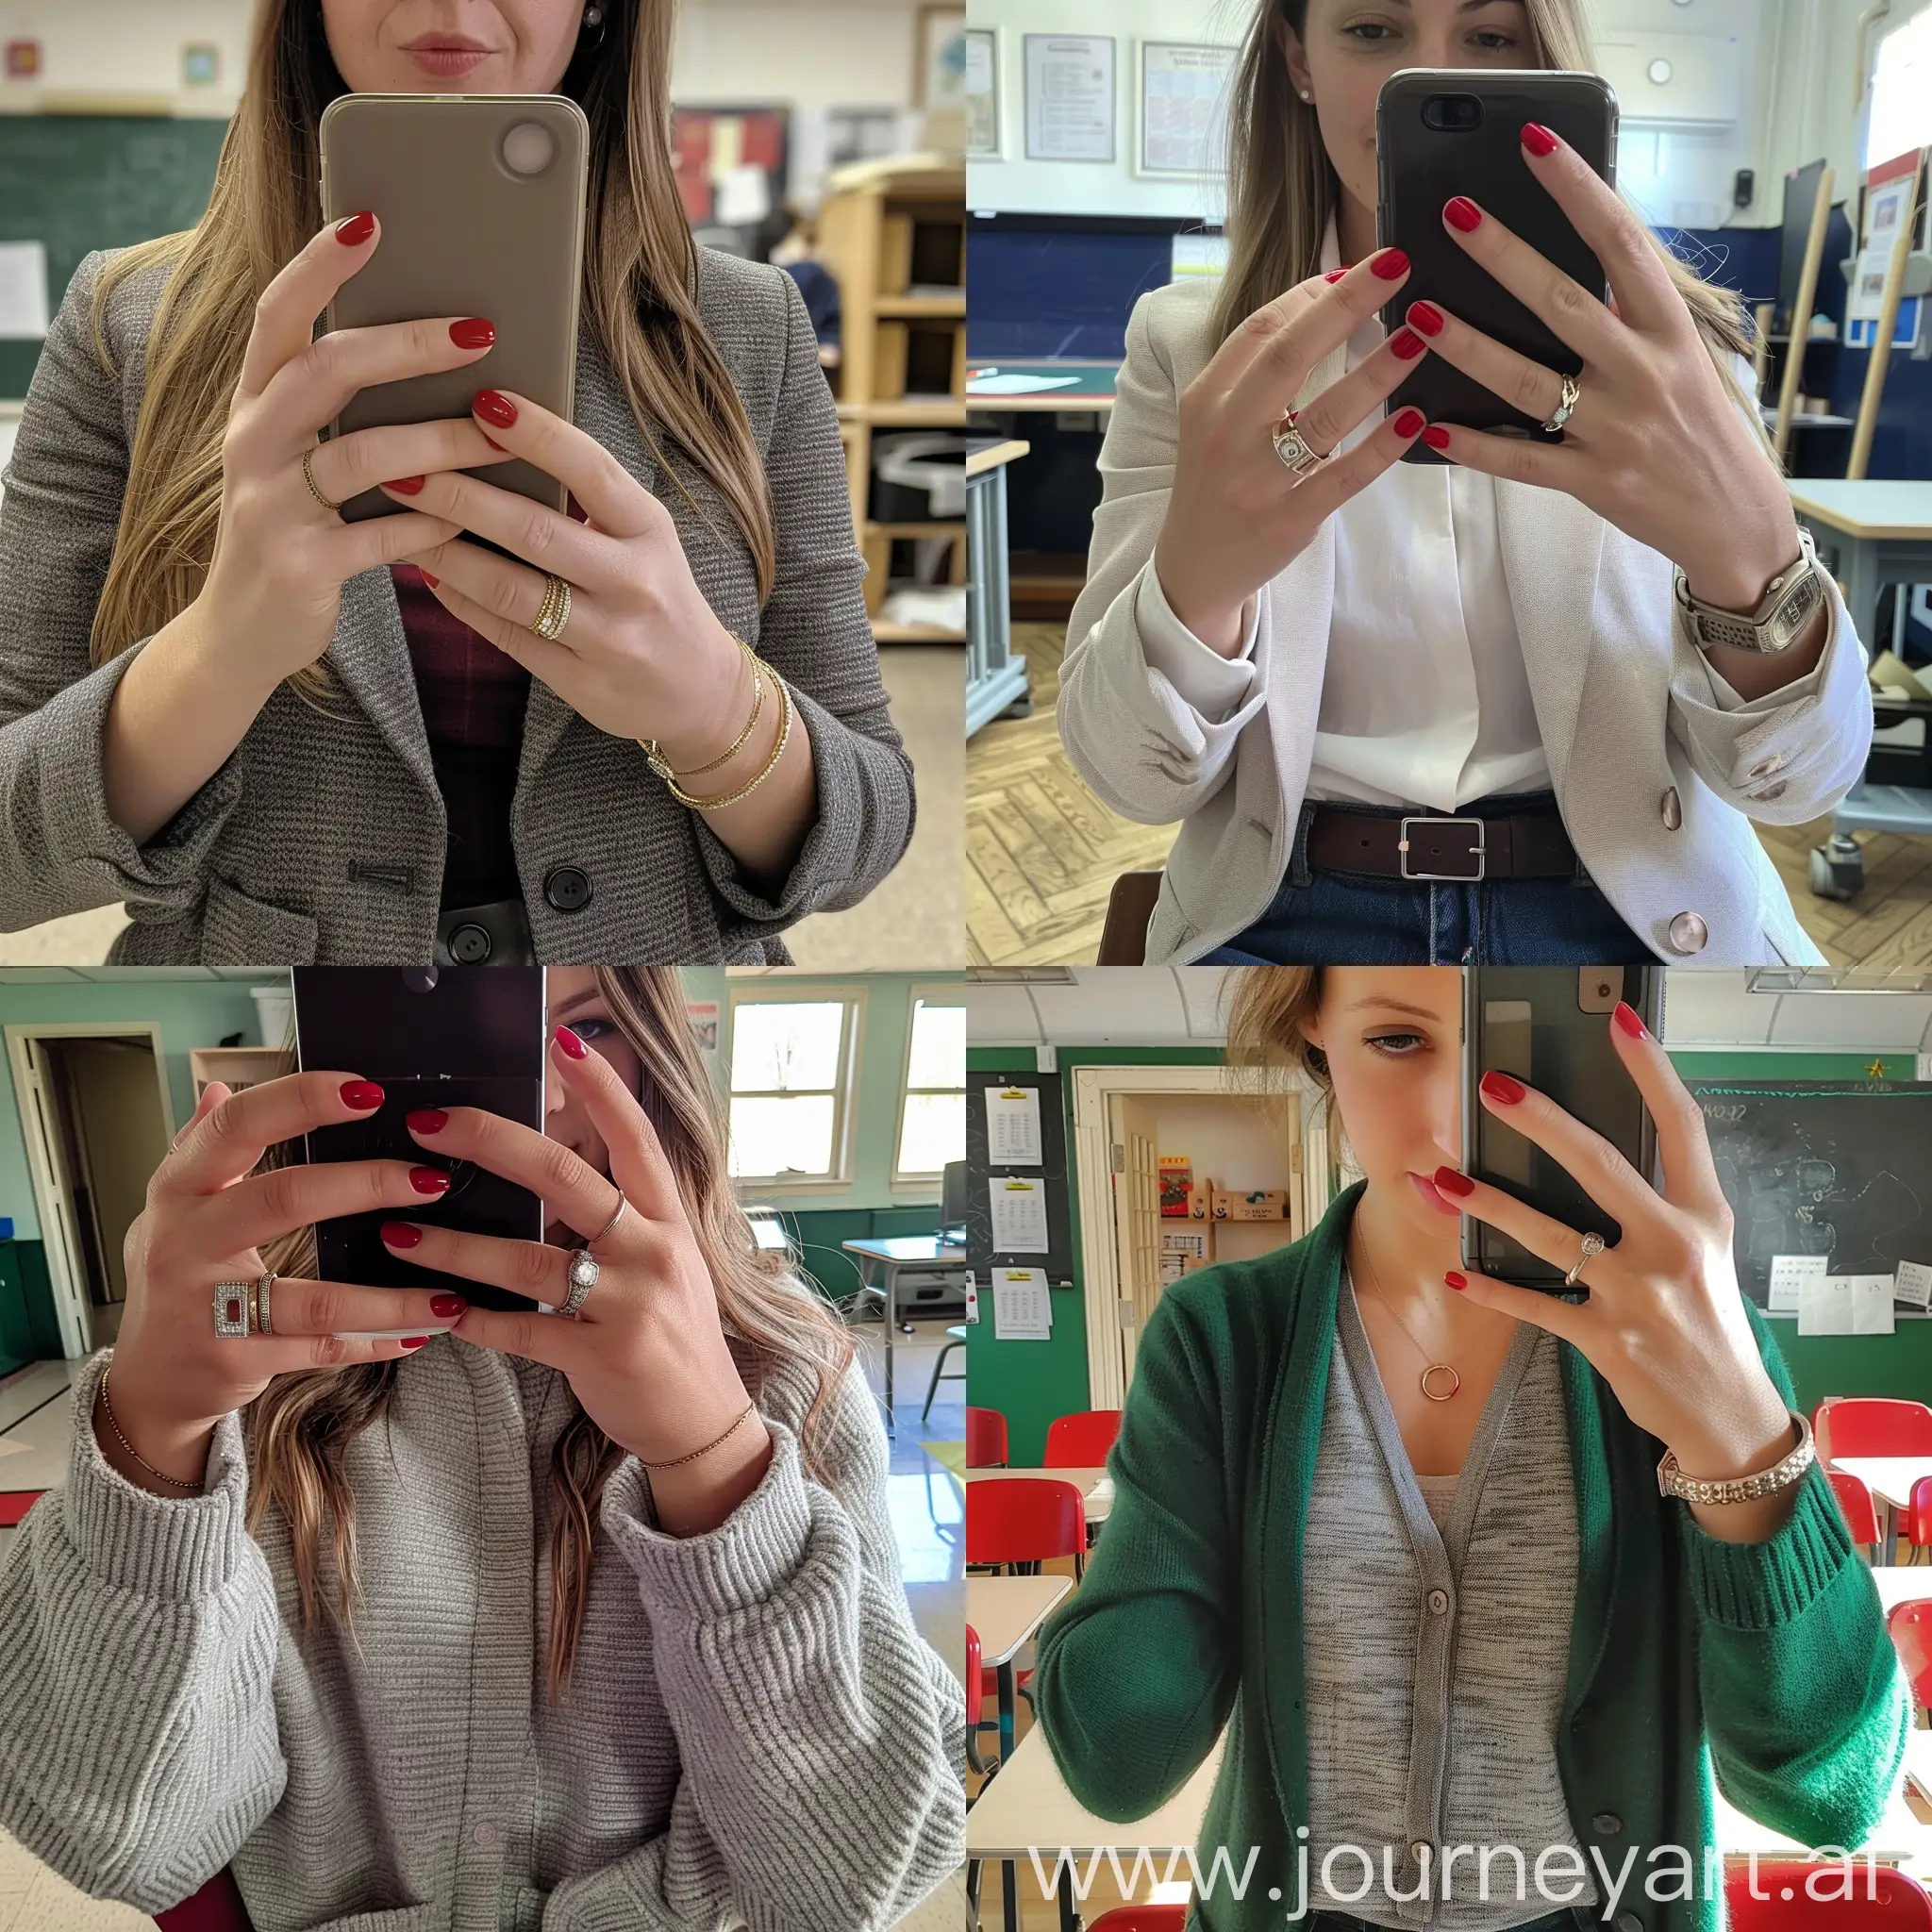 Young-Female-Teacher-Taking-Classroom-Selfie-with-Red-Gel-Nails